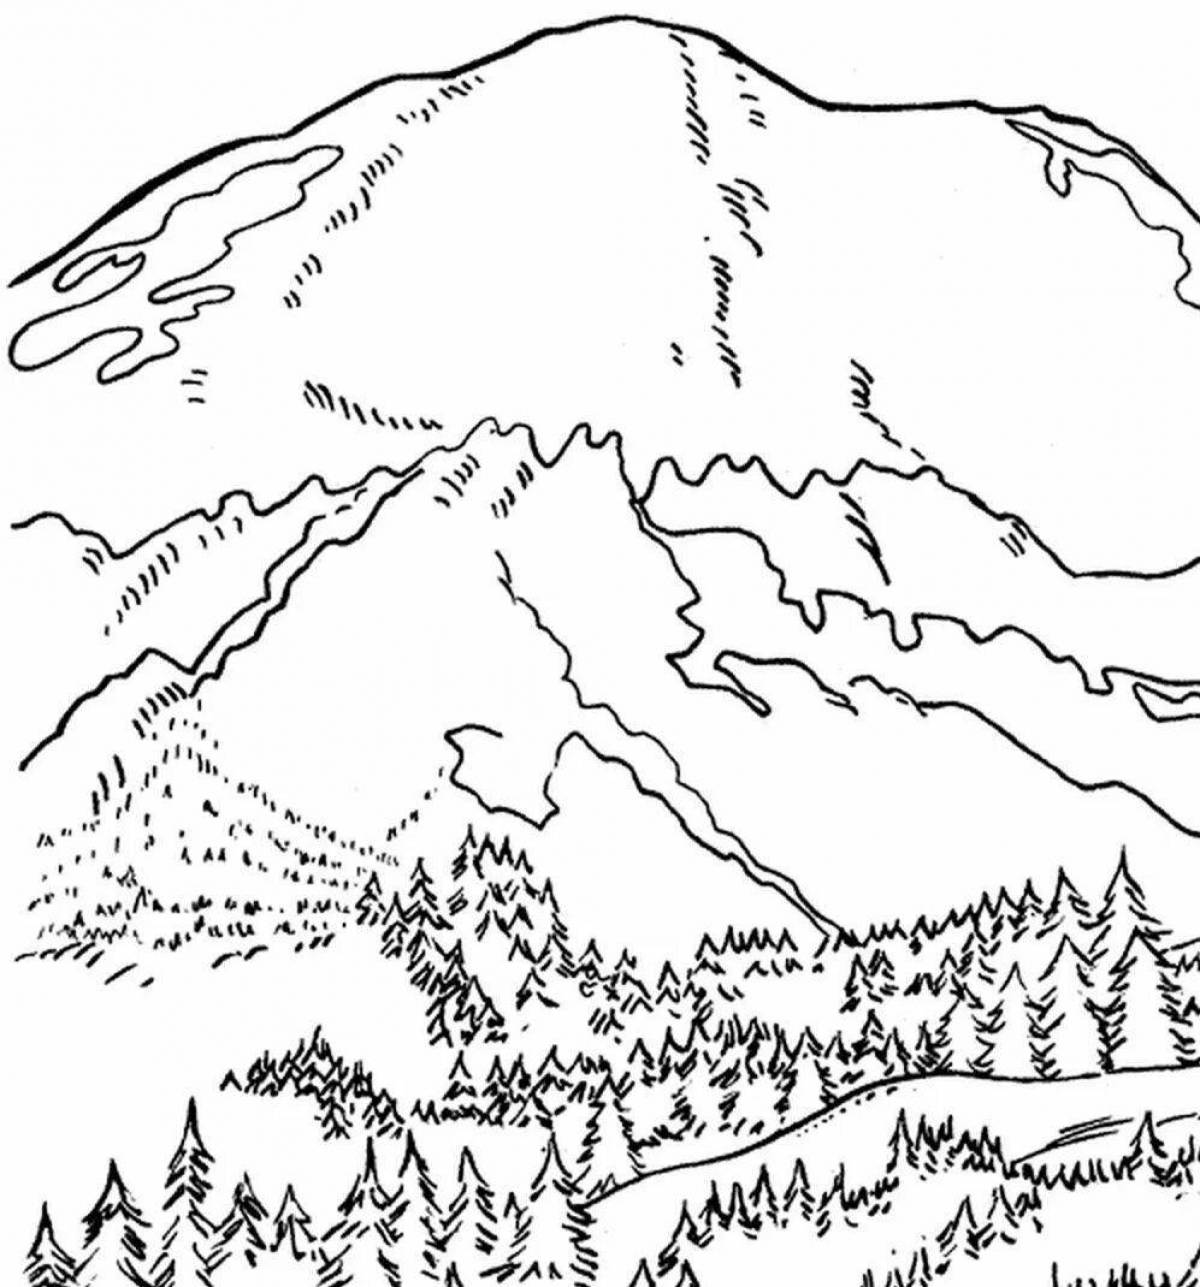 Kazakhstan beautiful nature coloring pages for kids